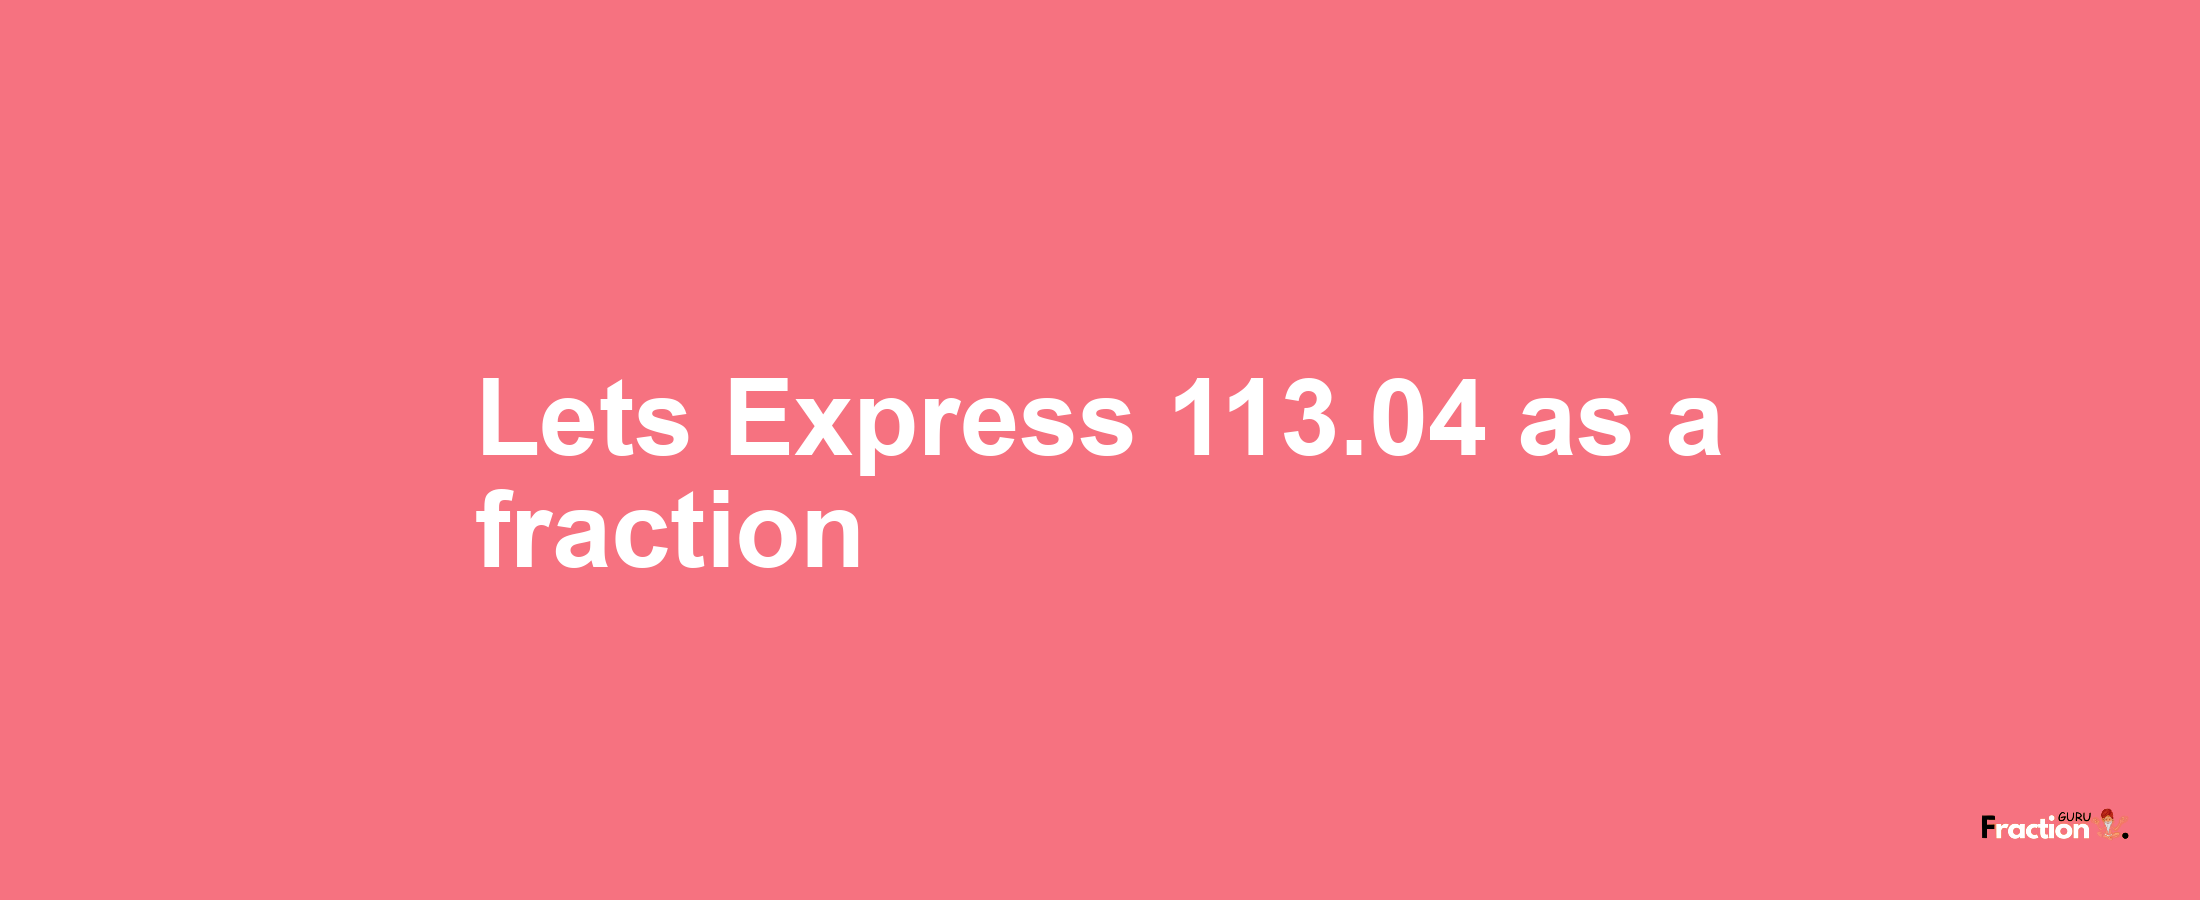 Lets Express 113.04 as afraction